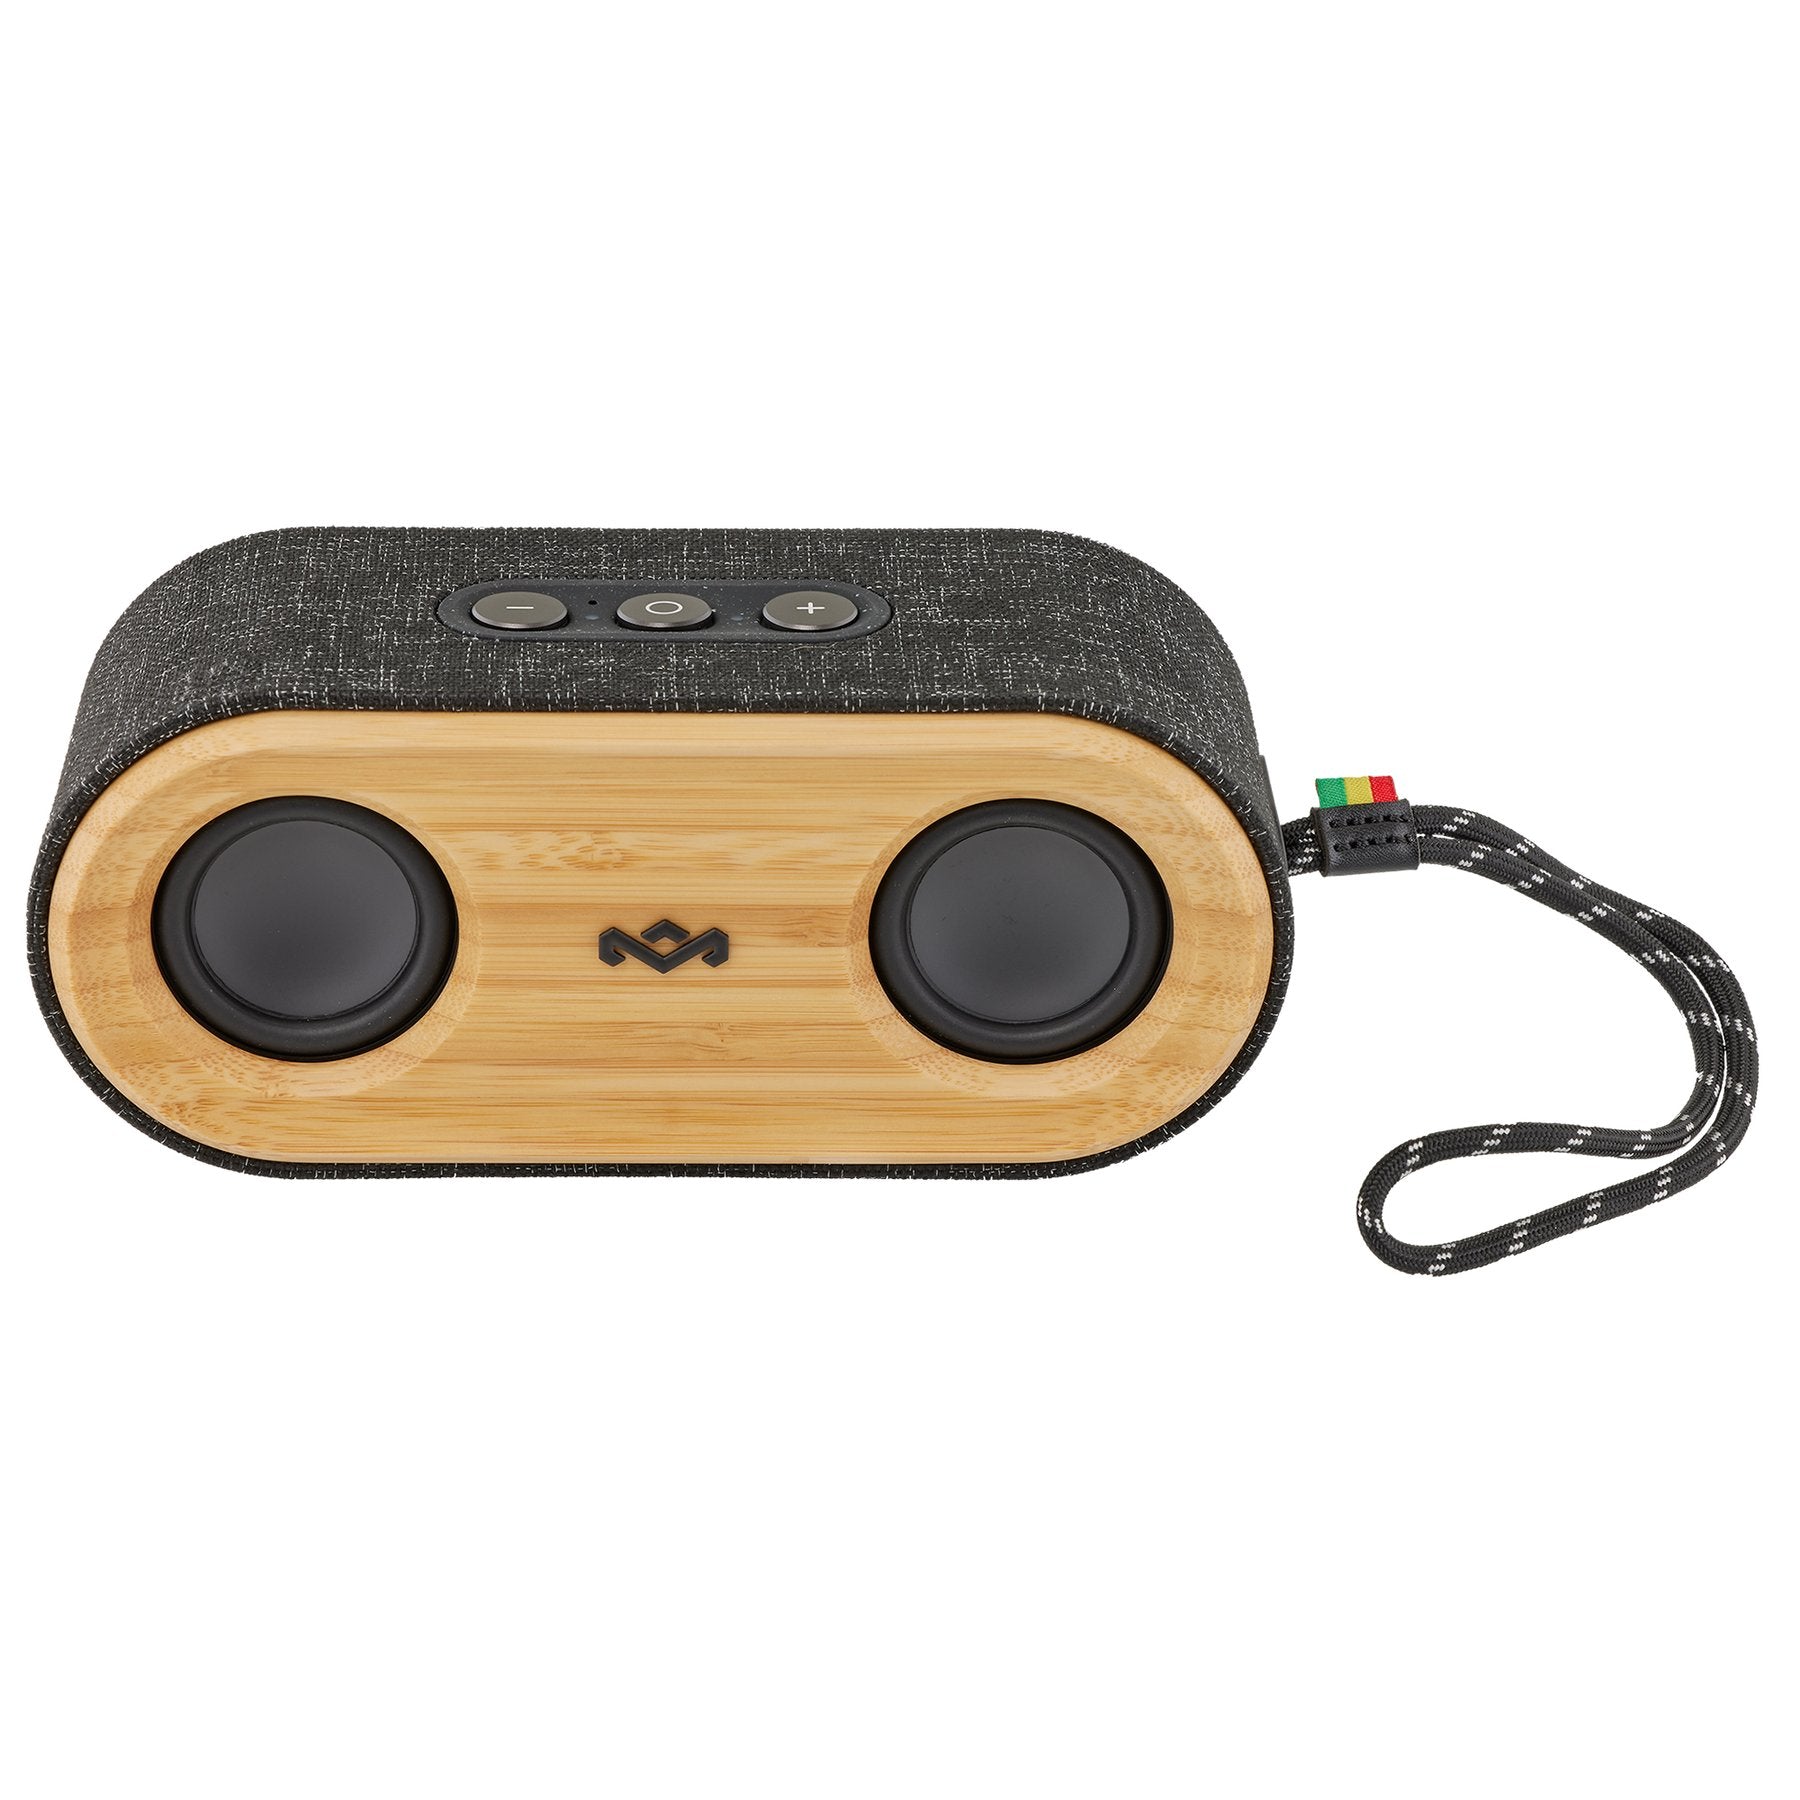 Daily Endorsement: House of Marley Get Together Speakers